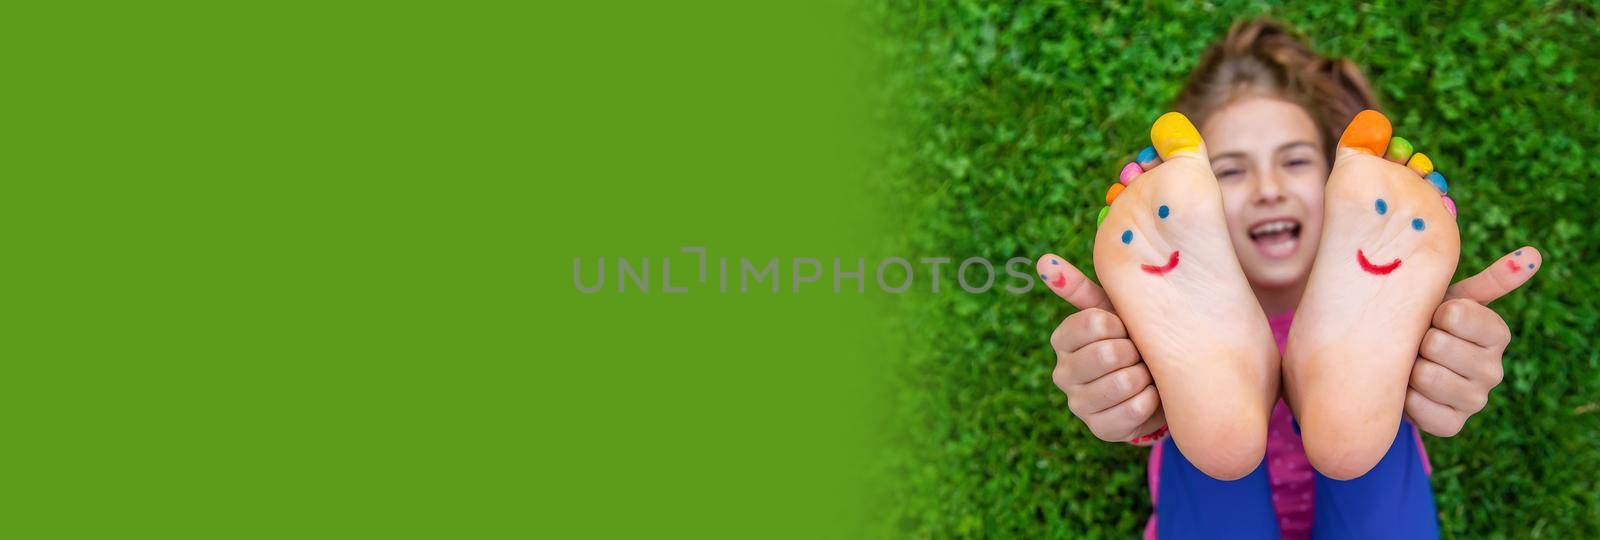 Feet of a child on the grass with a painted smile. Selection focus. by yanadjana